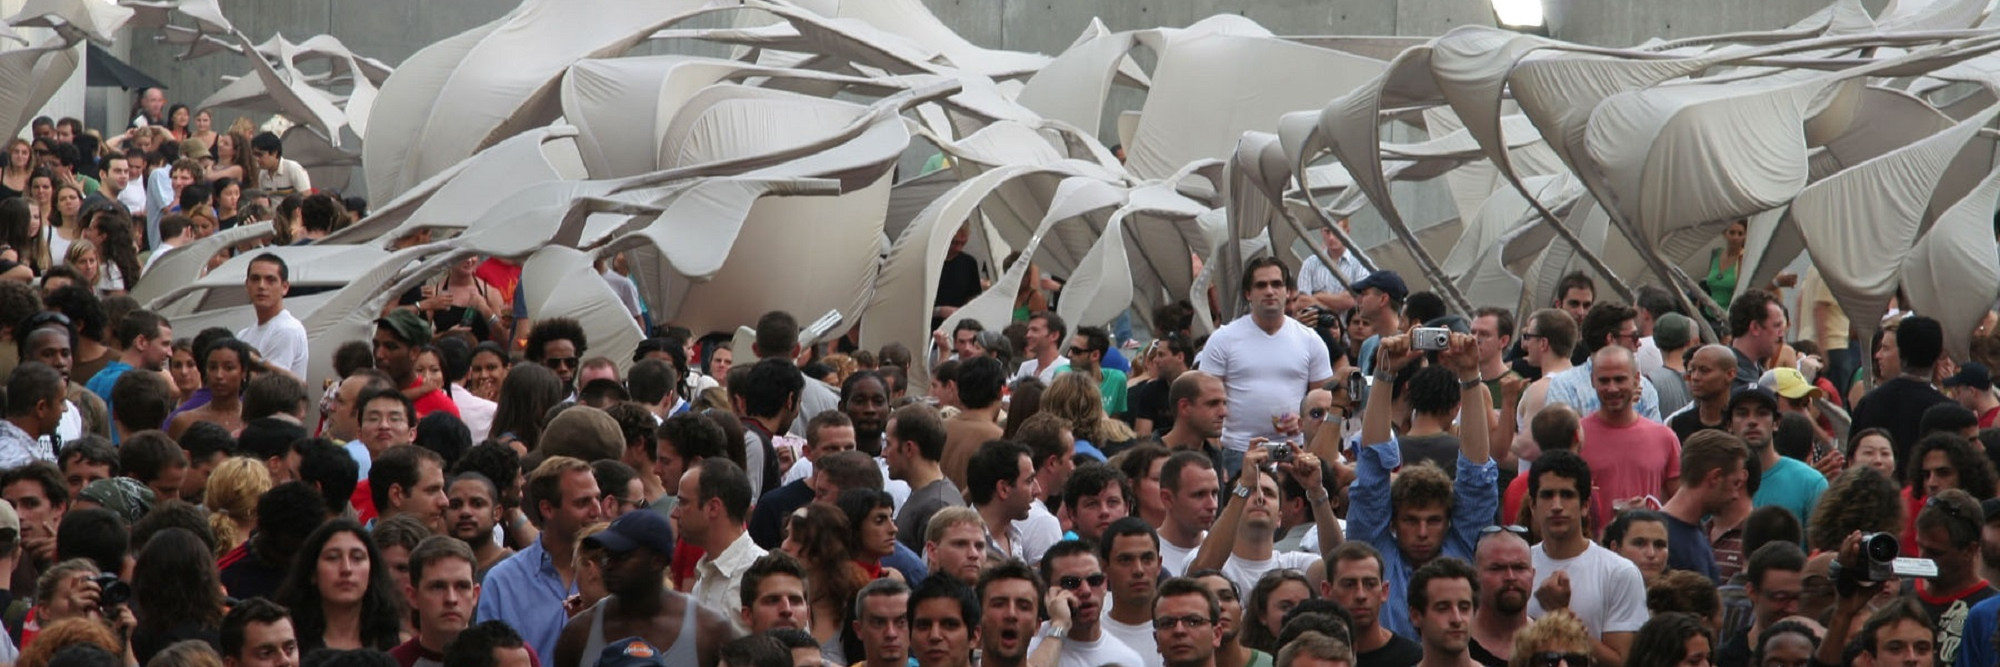 Warm Up crowd in 2005, presented at MoMA PS1 as part of Warm Up 2005. Photo courtesy of MoMA PS1.